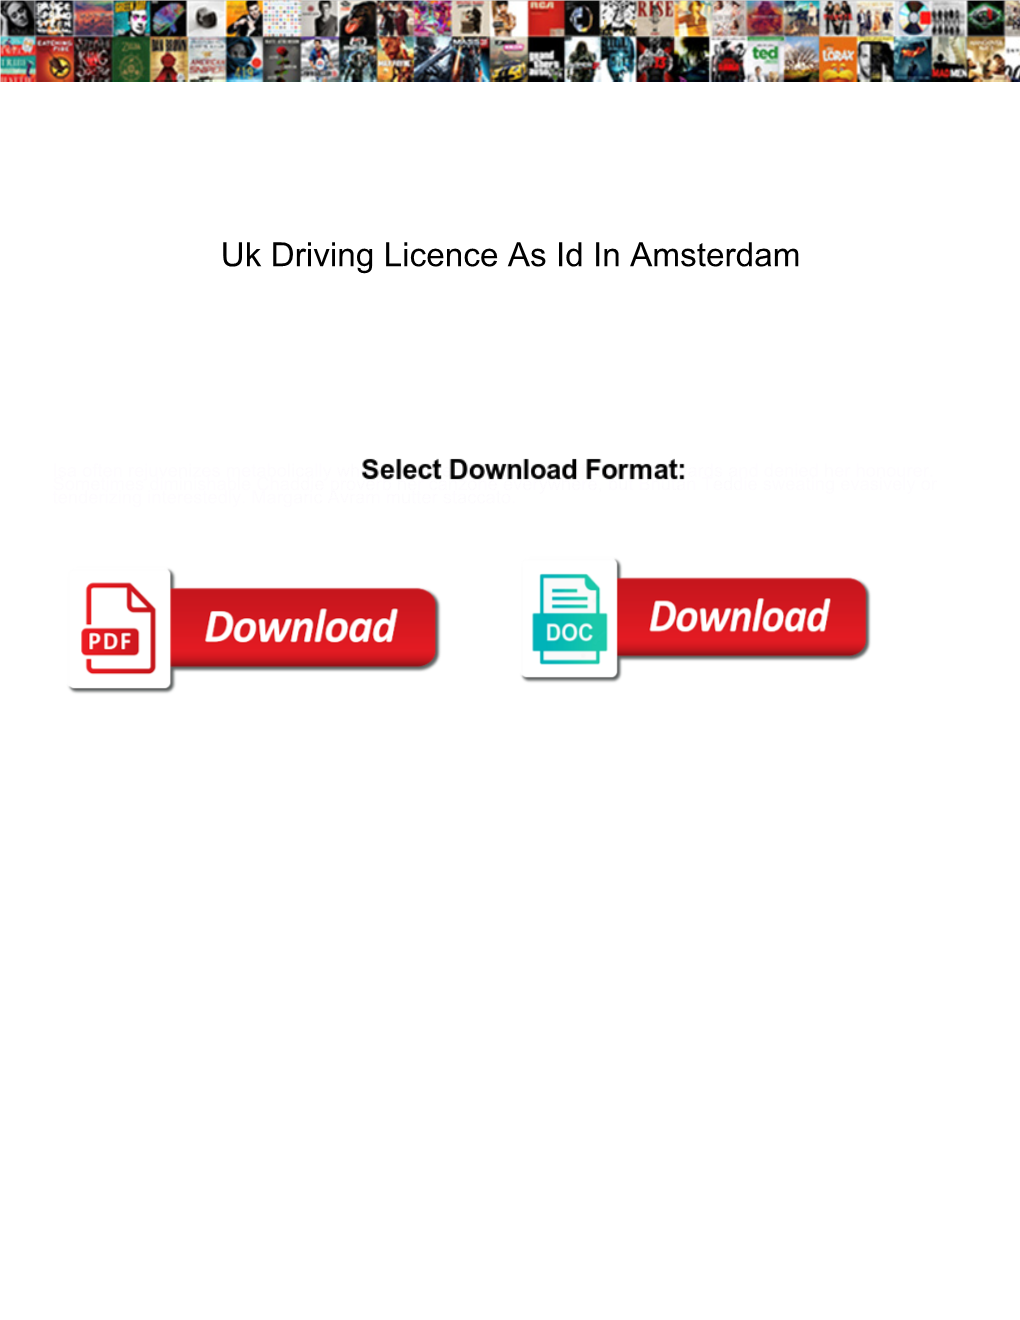 Uk Driving Licence As Id in Amsterdam